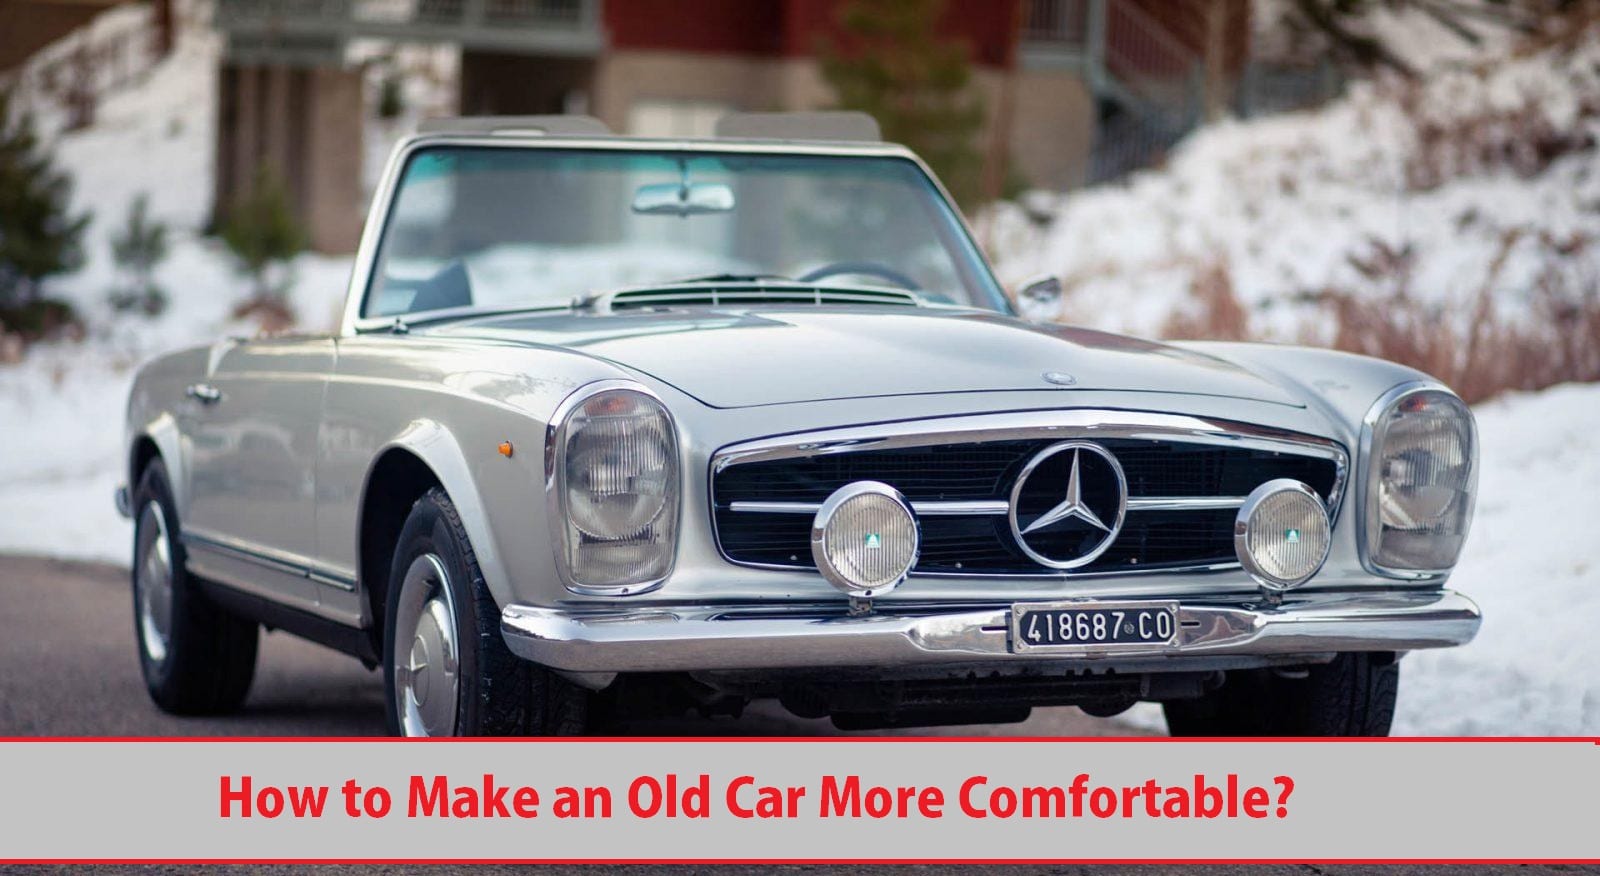 How to Make an Old Car More Comfortable?